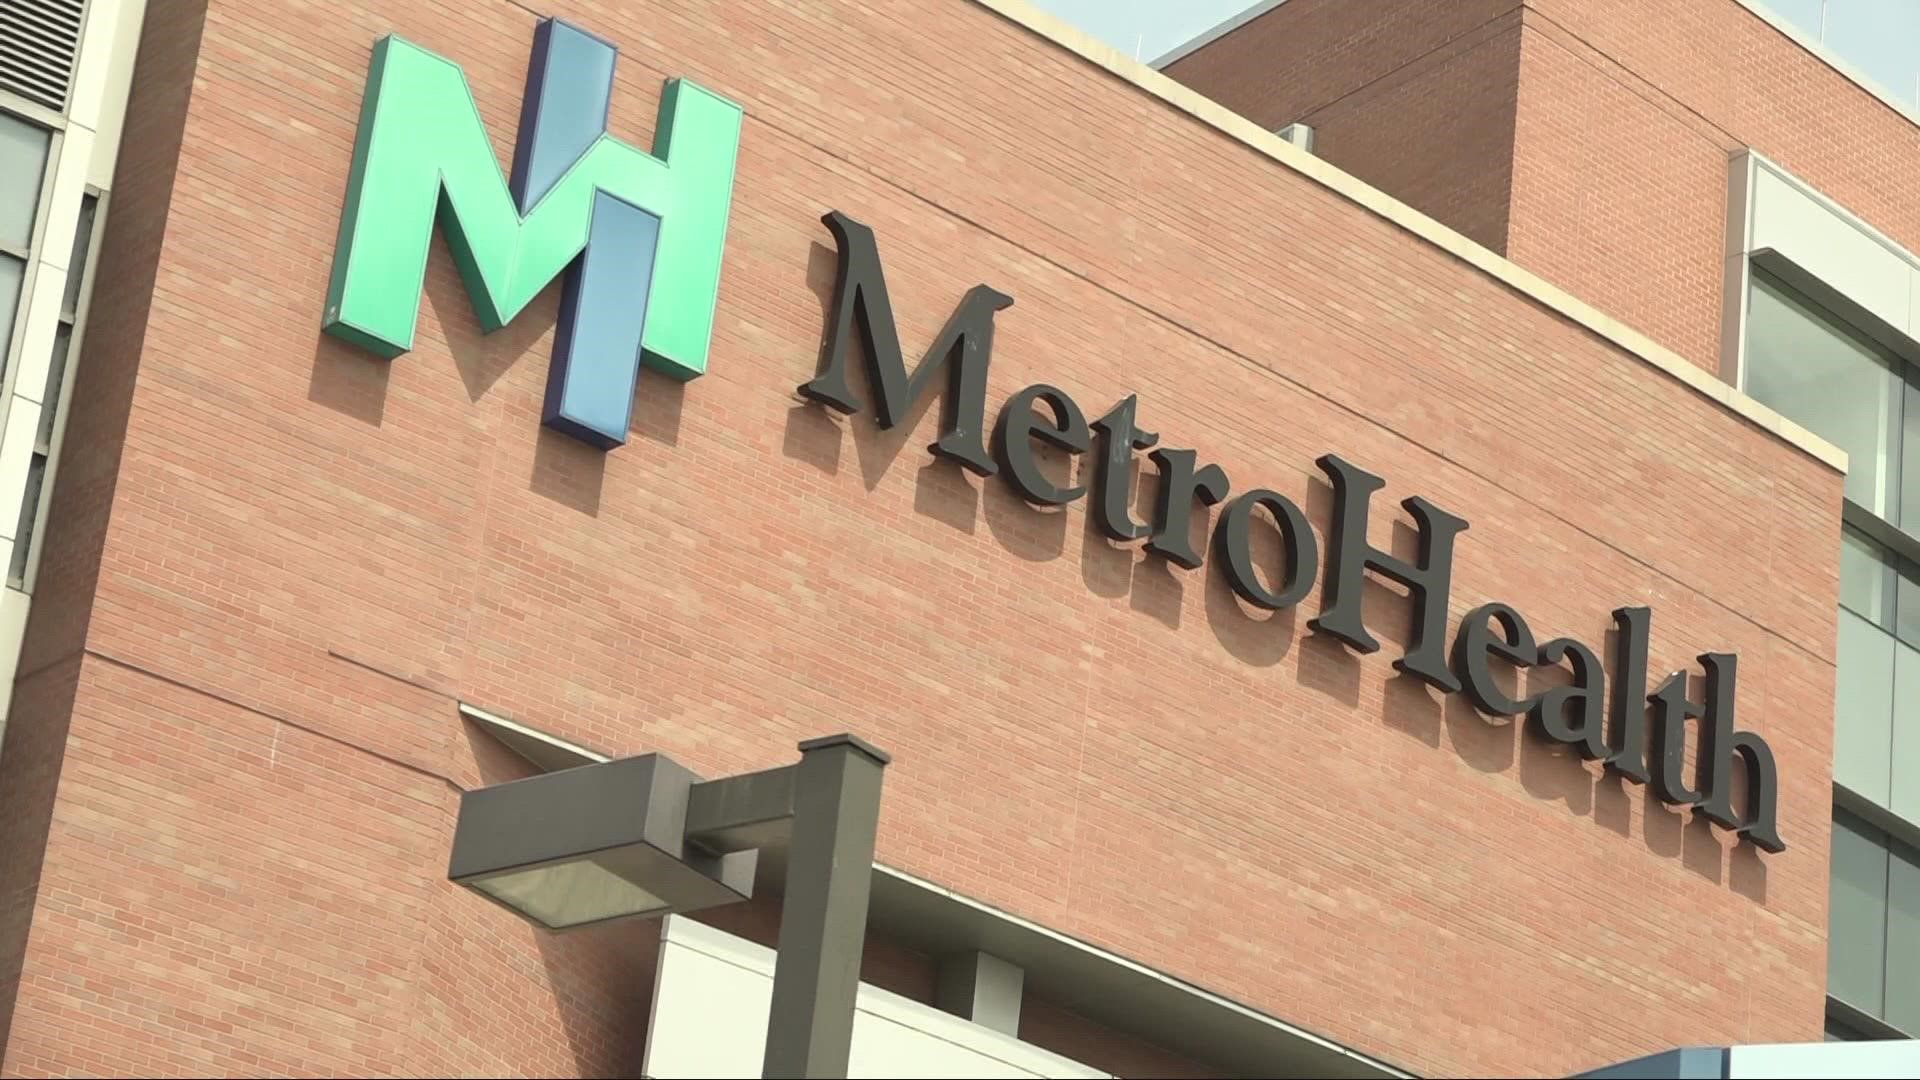 Platten's departure comes amid changes in leadership at MetroHealth following the sudden firing of CEO Akram Boutros last month.